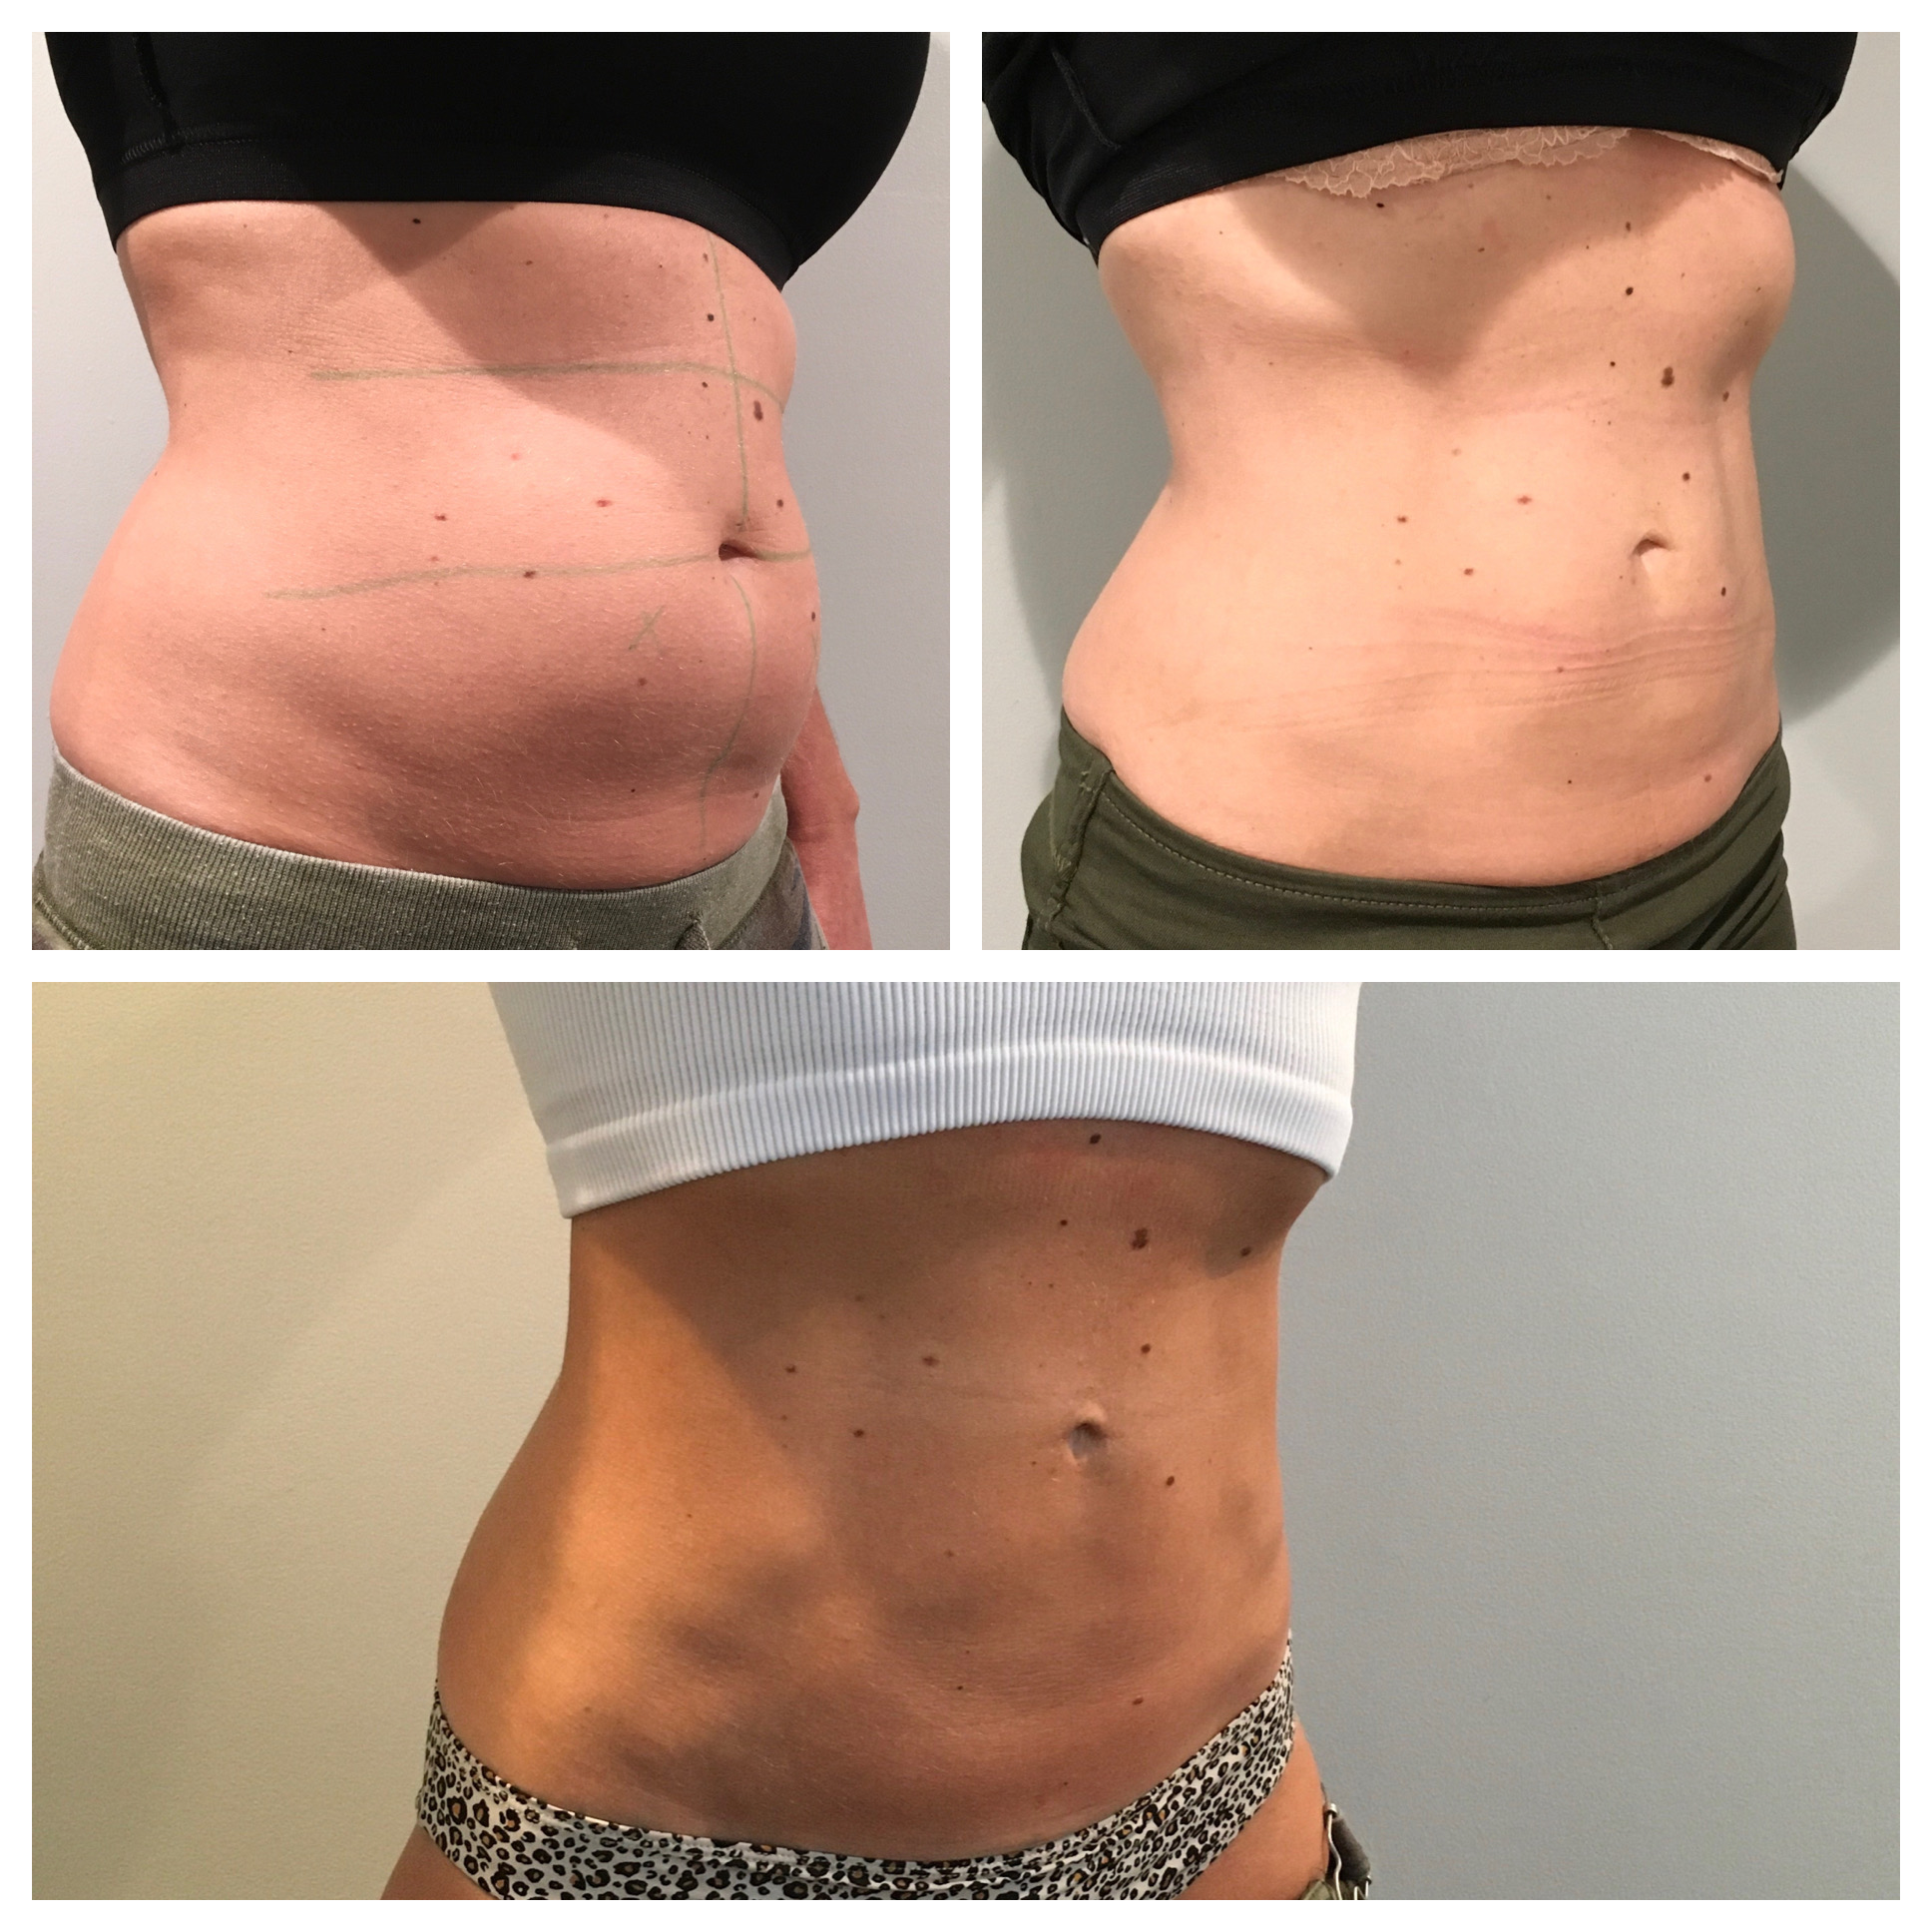 Does CoolSculpting Work?